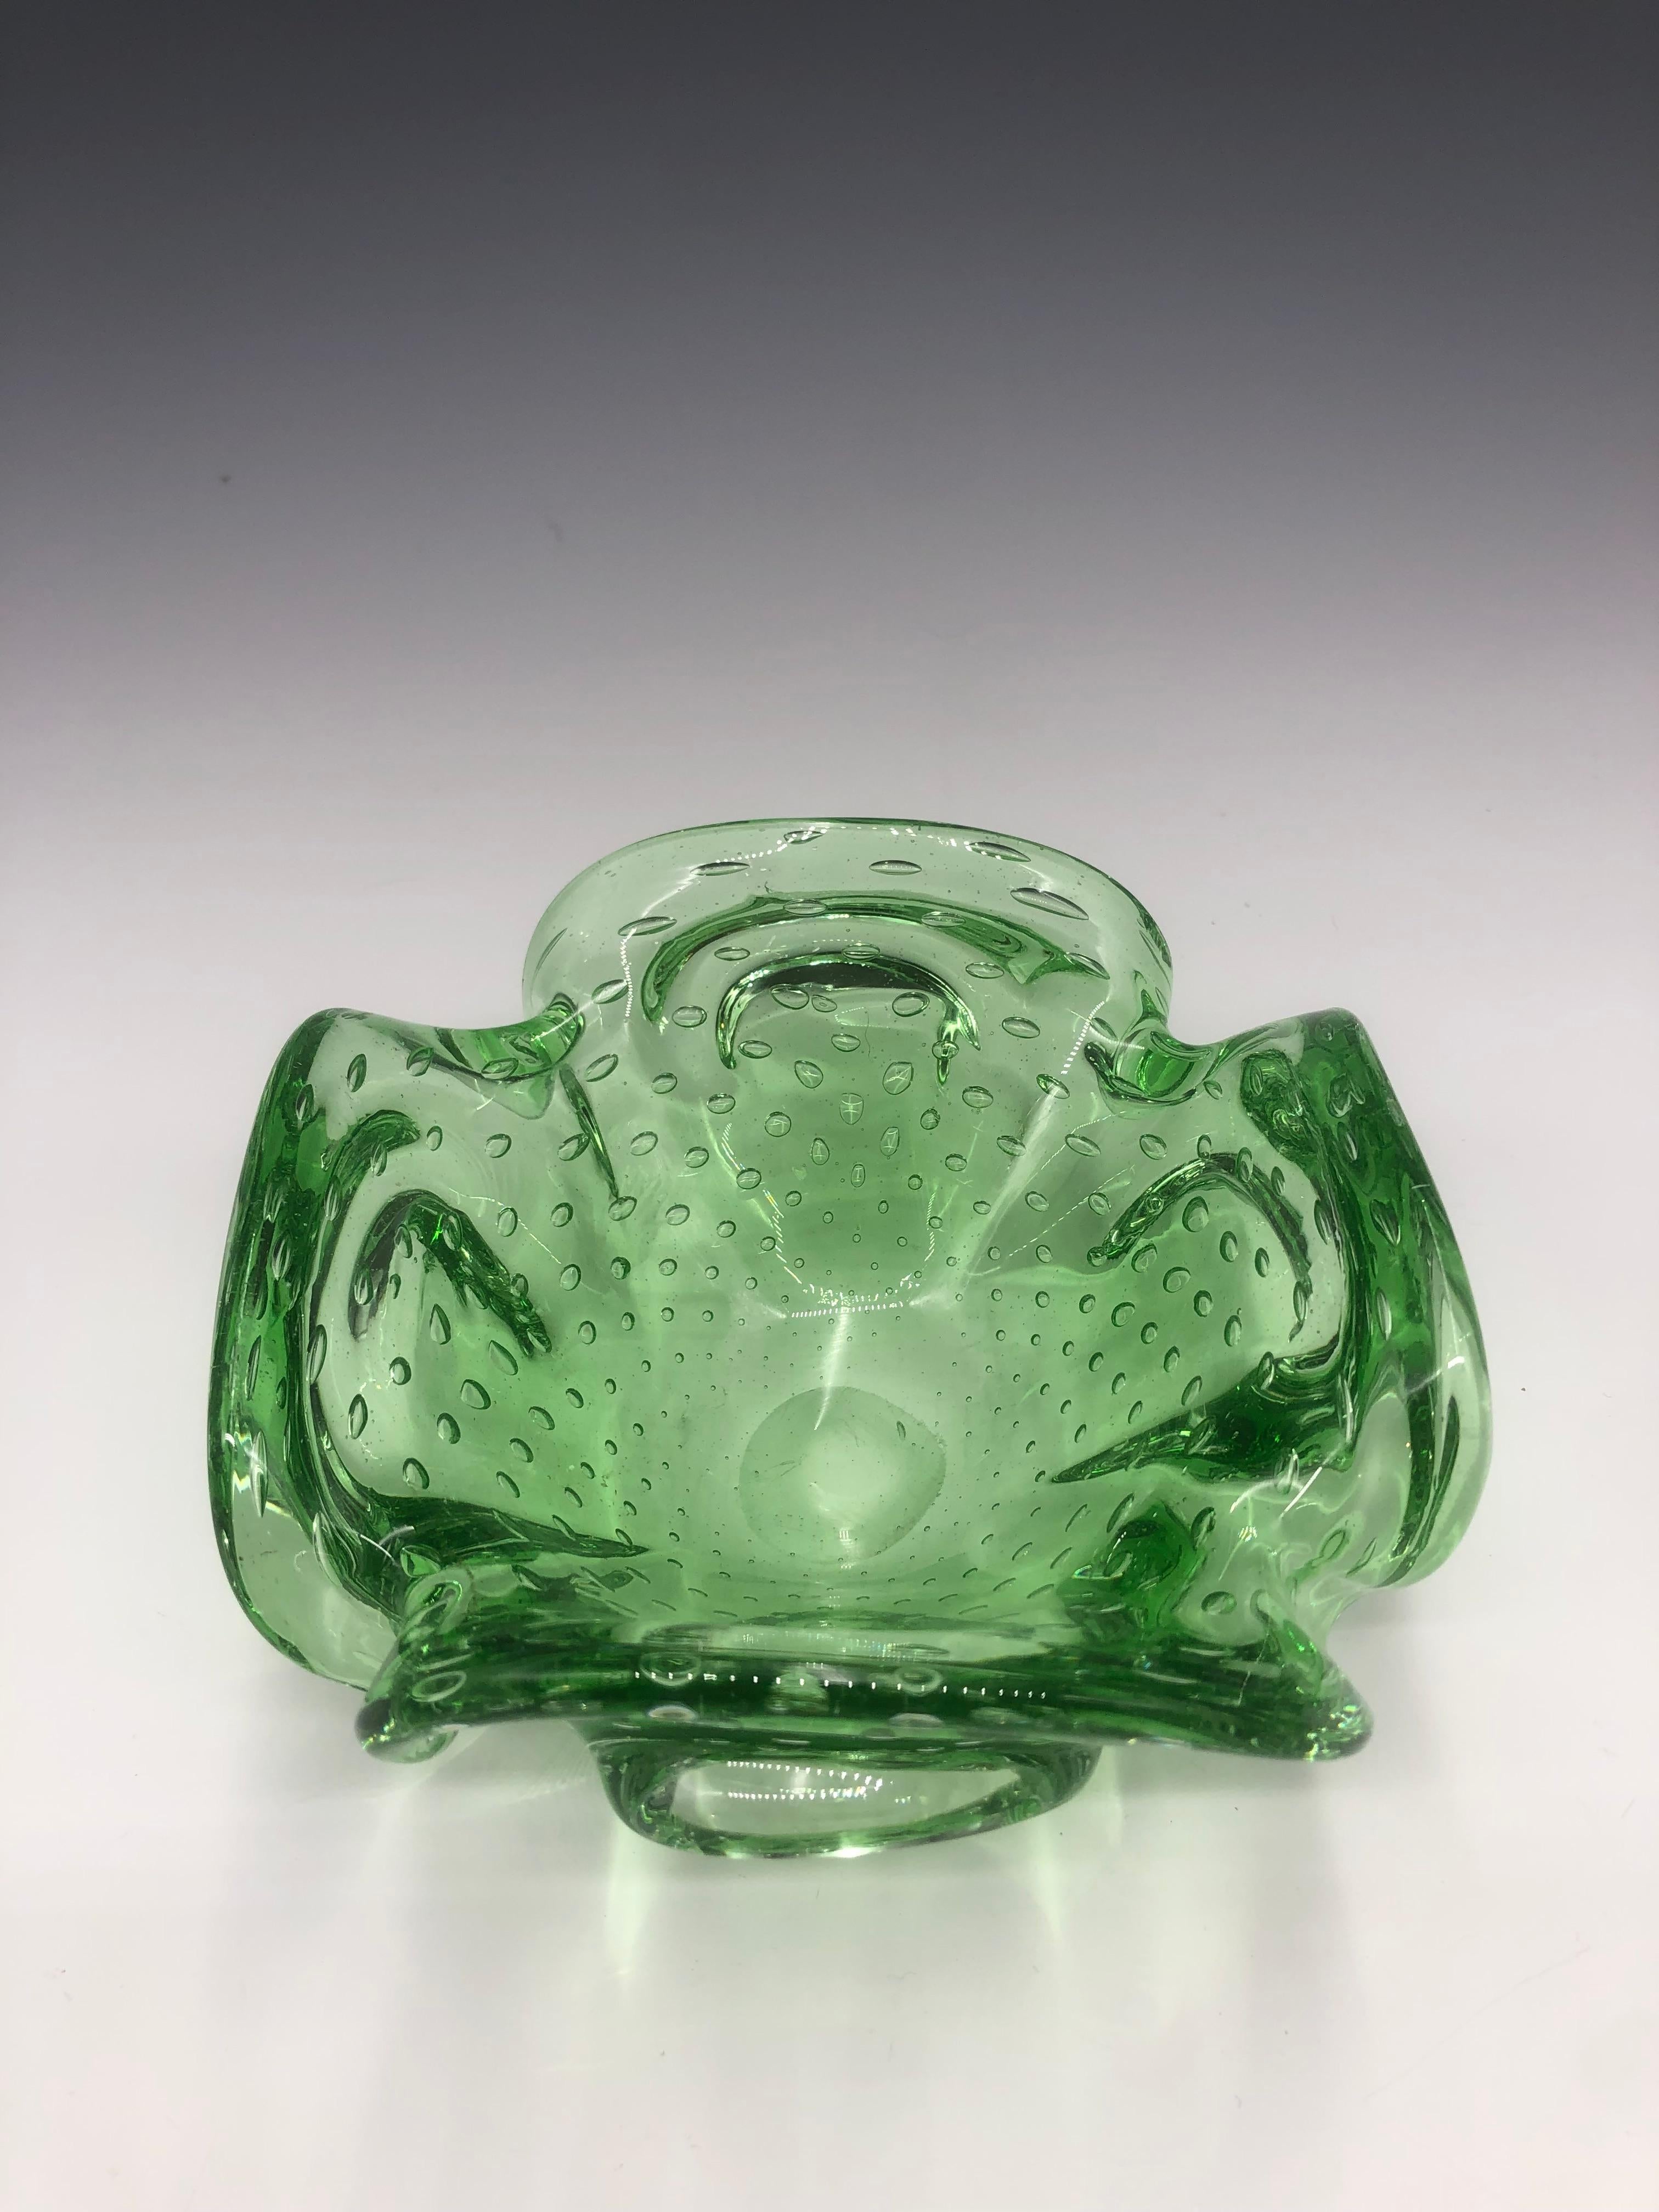 A gorgeous mid-century Green Bullicante Murano style glass bowl / large flower-shaped ashtray, blown using the sommerso technique with trapped bubbles. 

Excellent vintage condition, age-appropriate wear.

Beautiful tabletop or catch-all